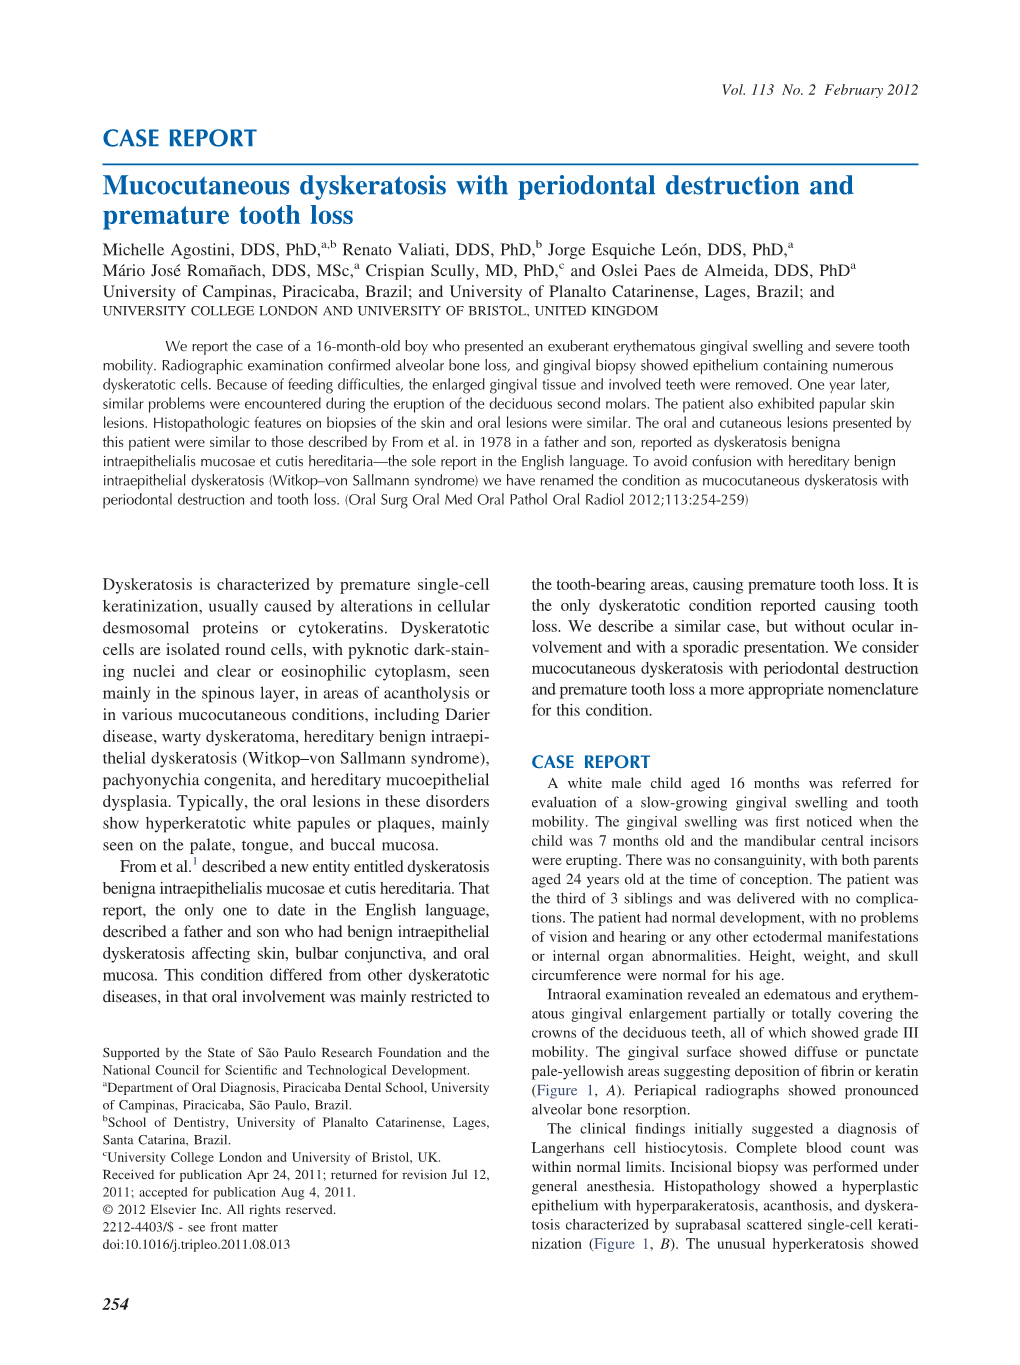 Mucocutaneous Dyskeratosis with Periodontal Destruction And